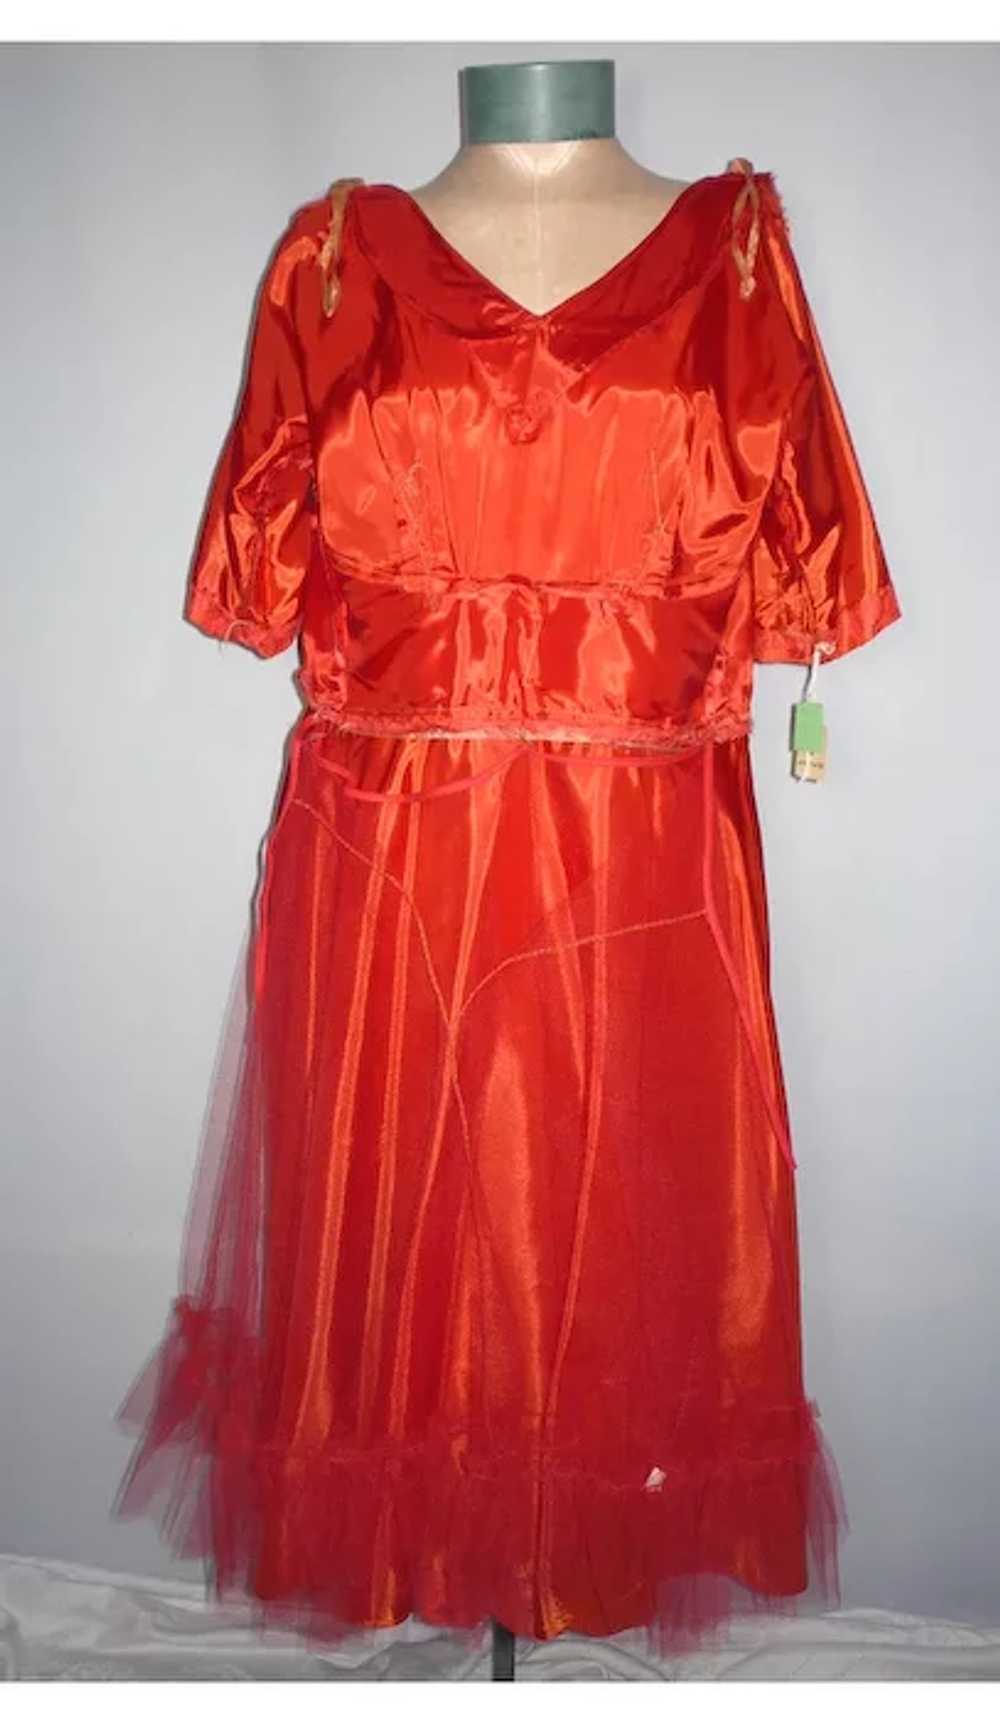 Vintage 1950s Red Chantilly Lace Party Dress - image 8